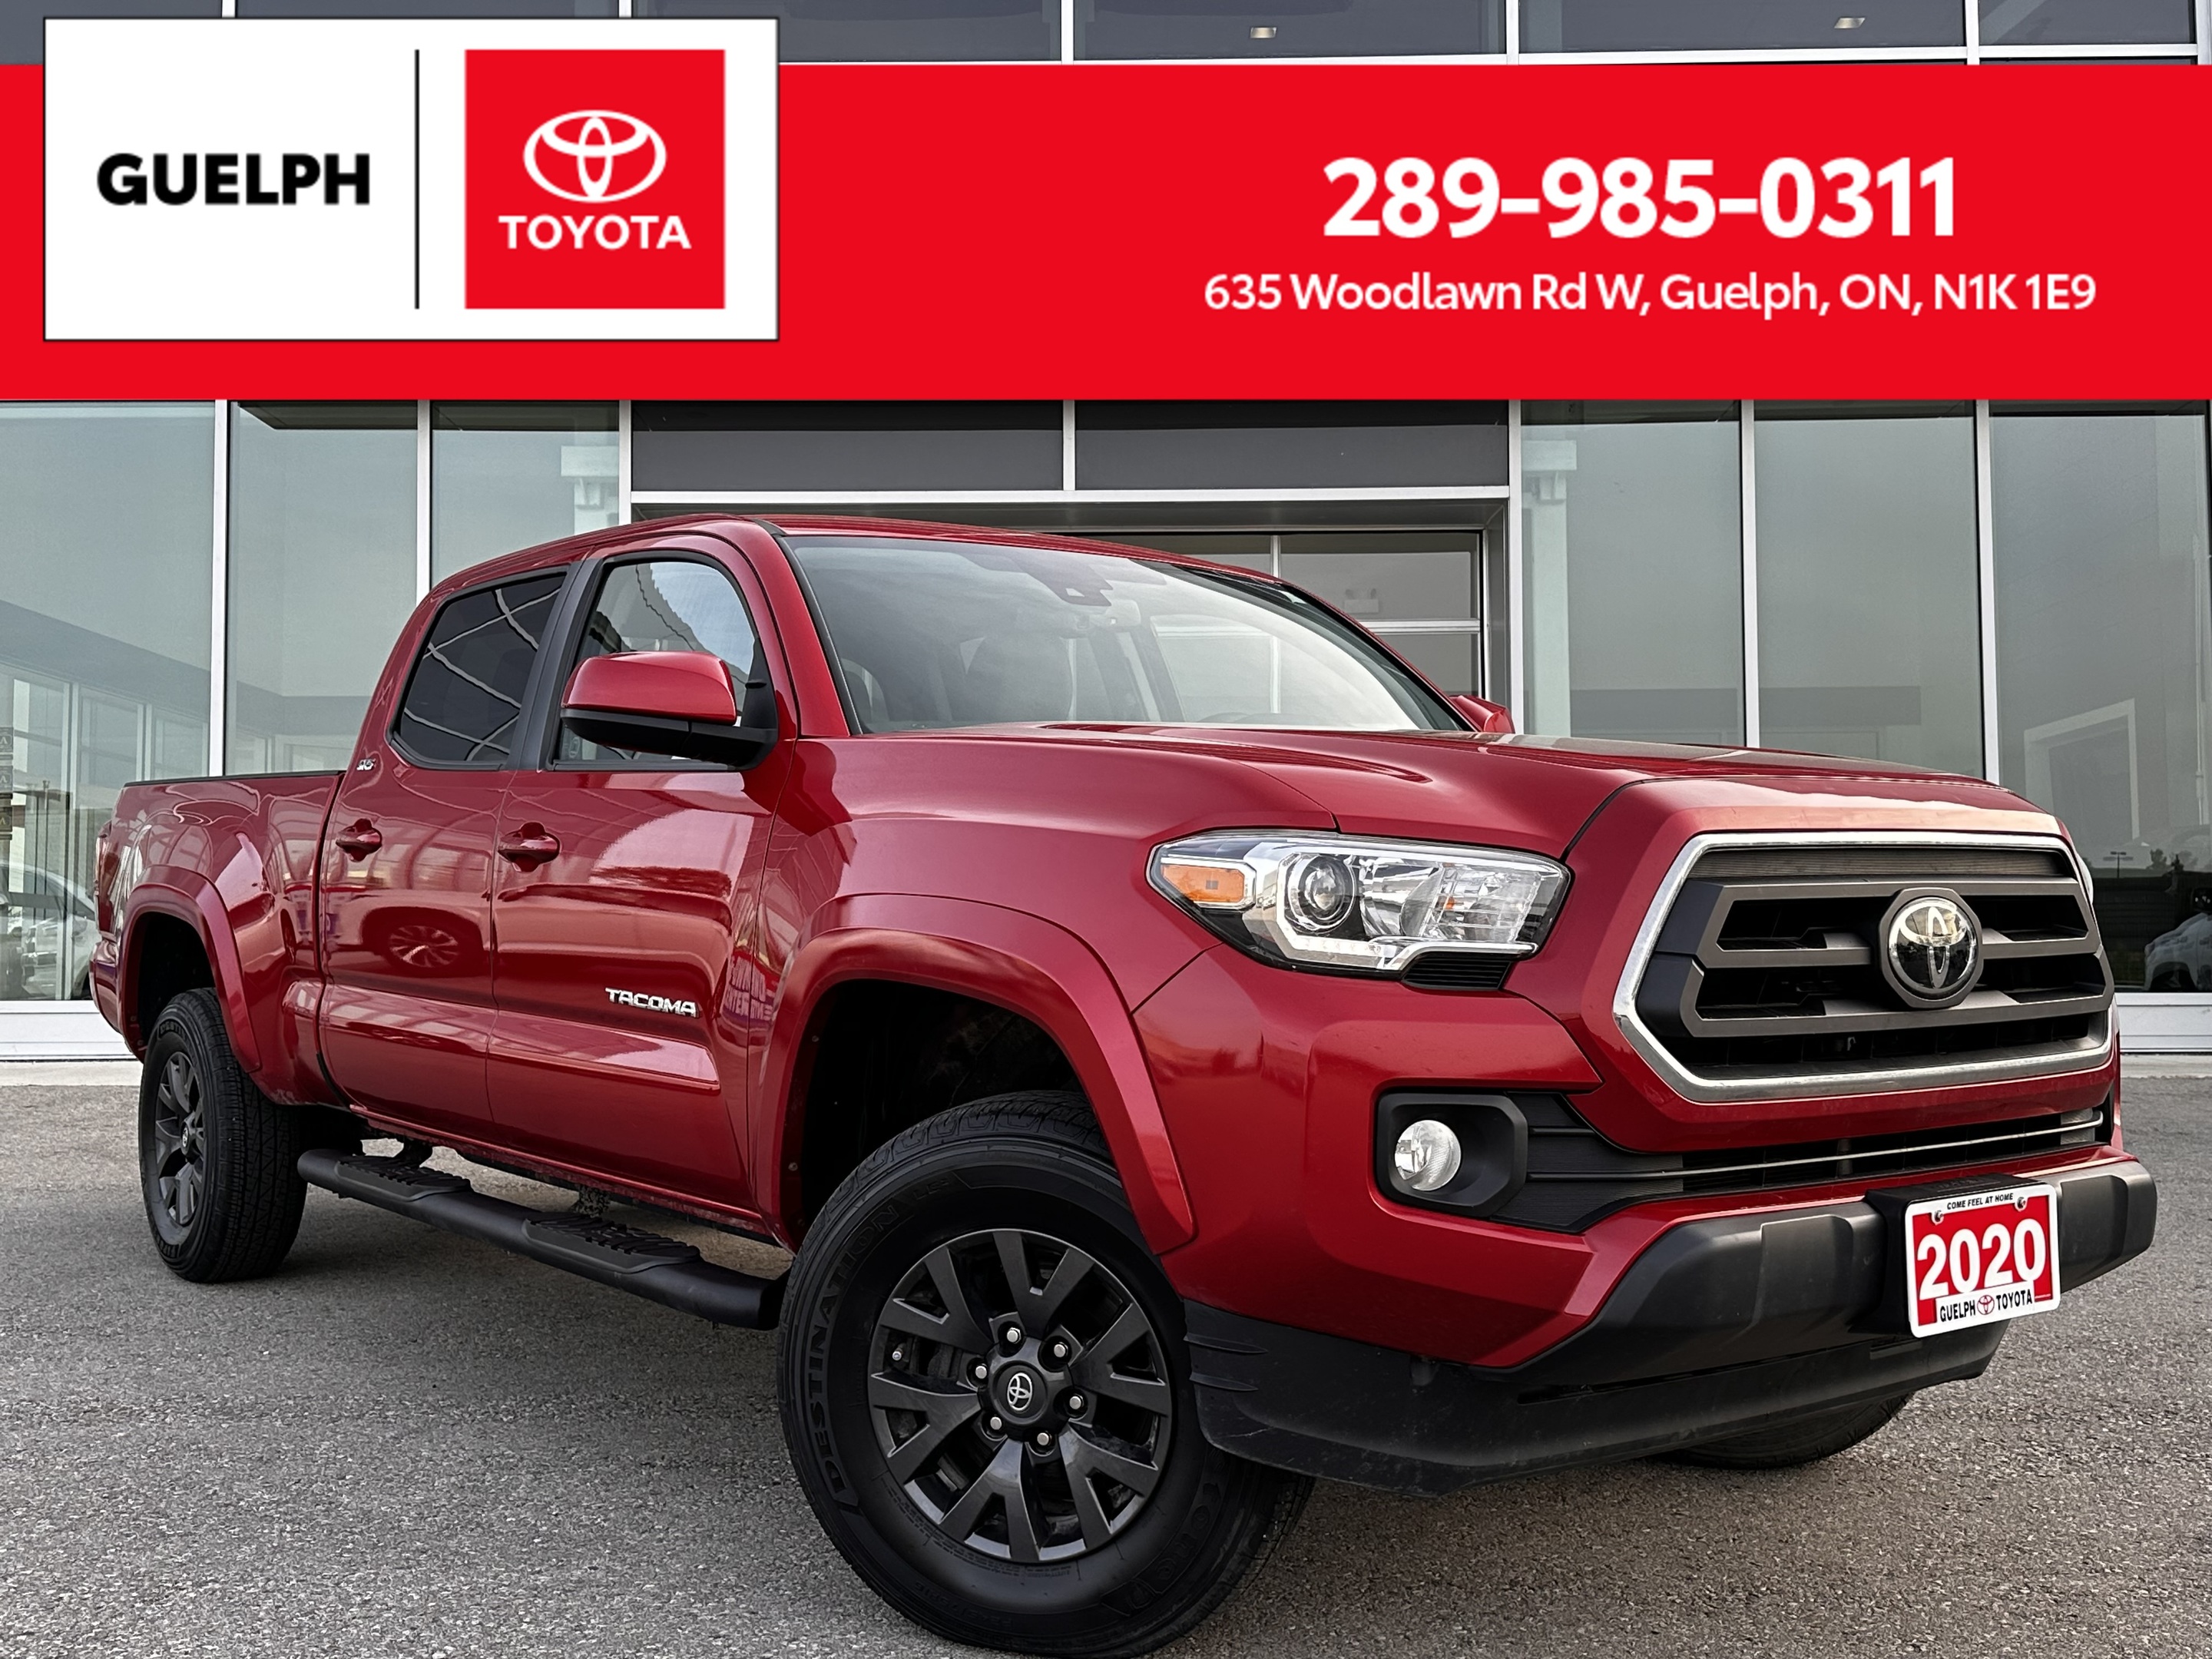 2020 Toyota Tacoma 4x4 DBL CAB - ONE OWNER 